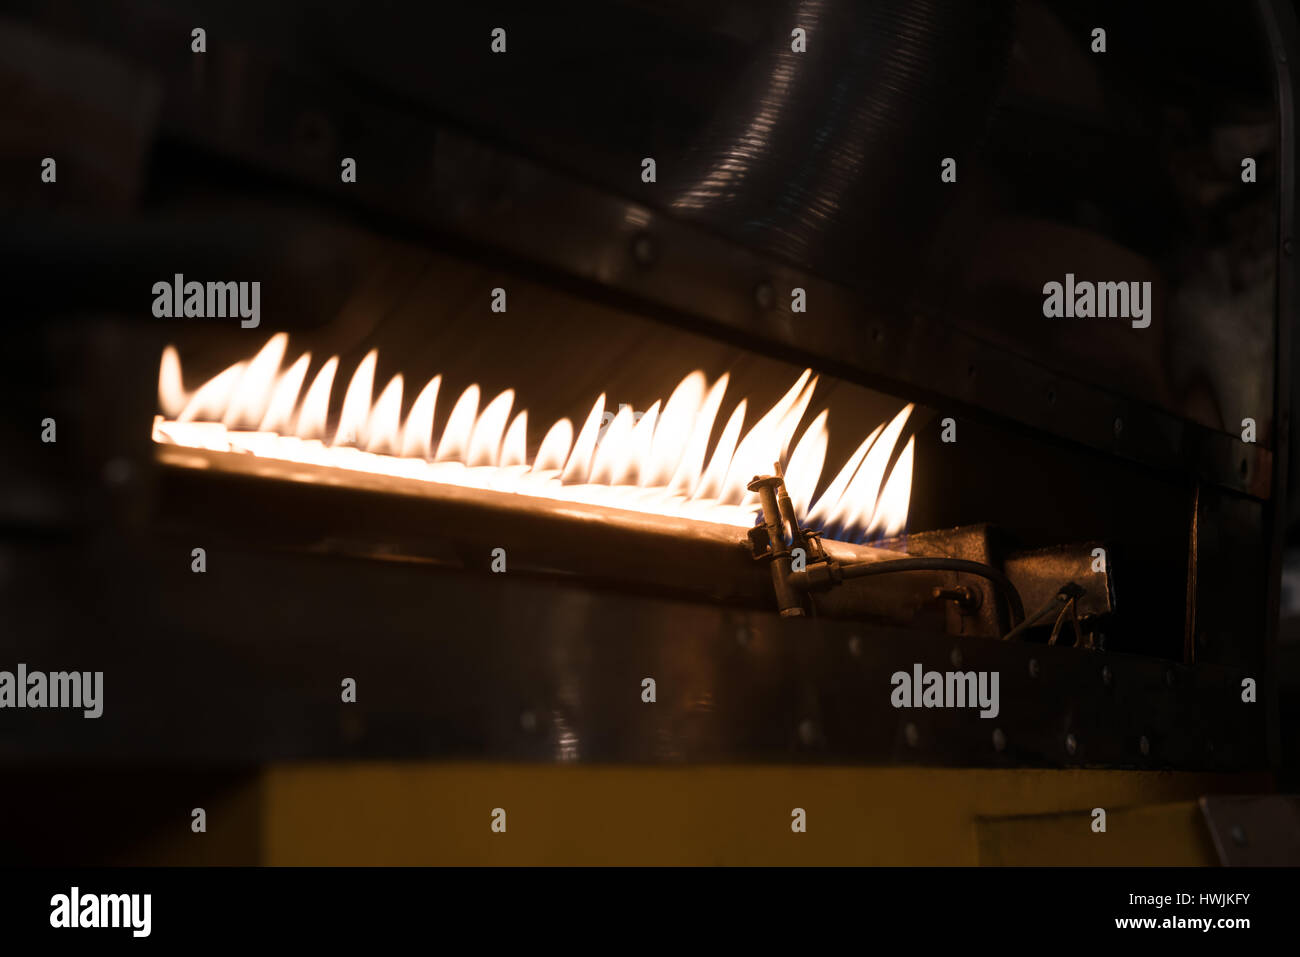 Oven of roaster with burning fire Stock Photo